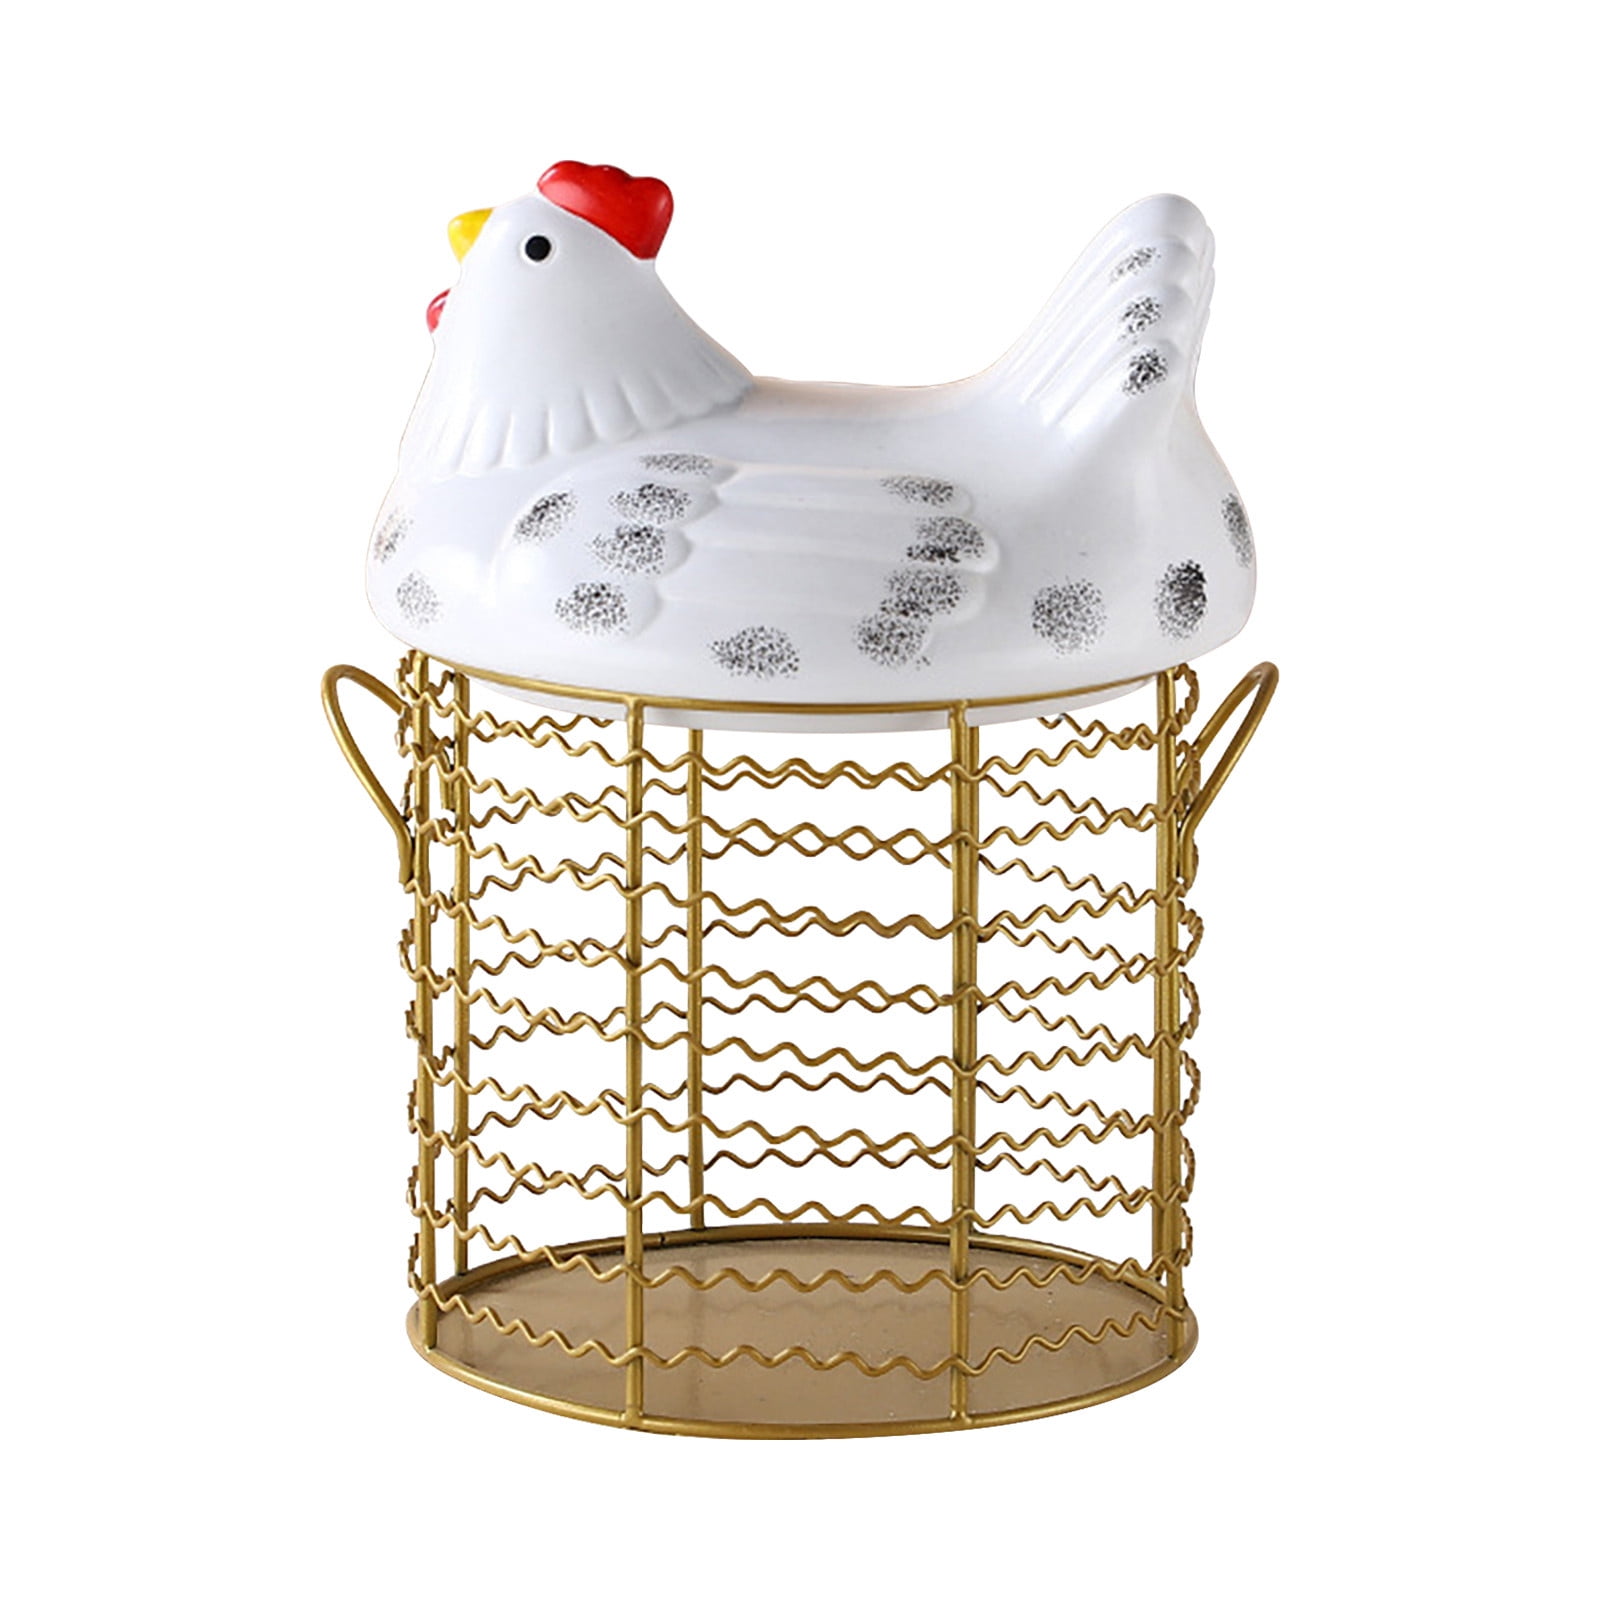  Chicken Egg Basket For Collecting Eggs,Wire Egg